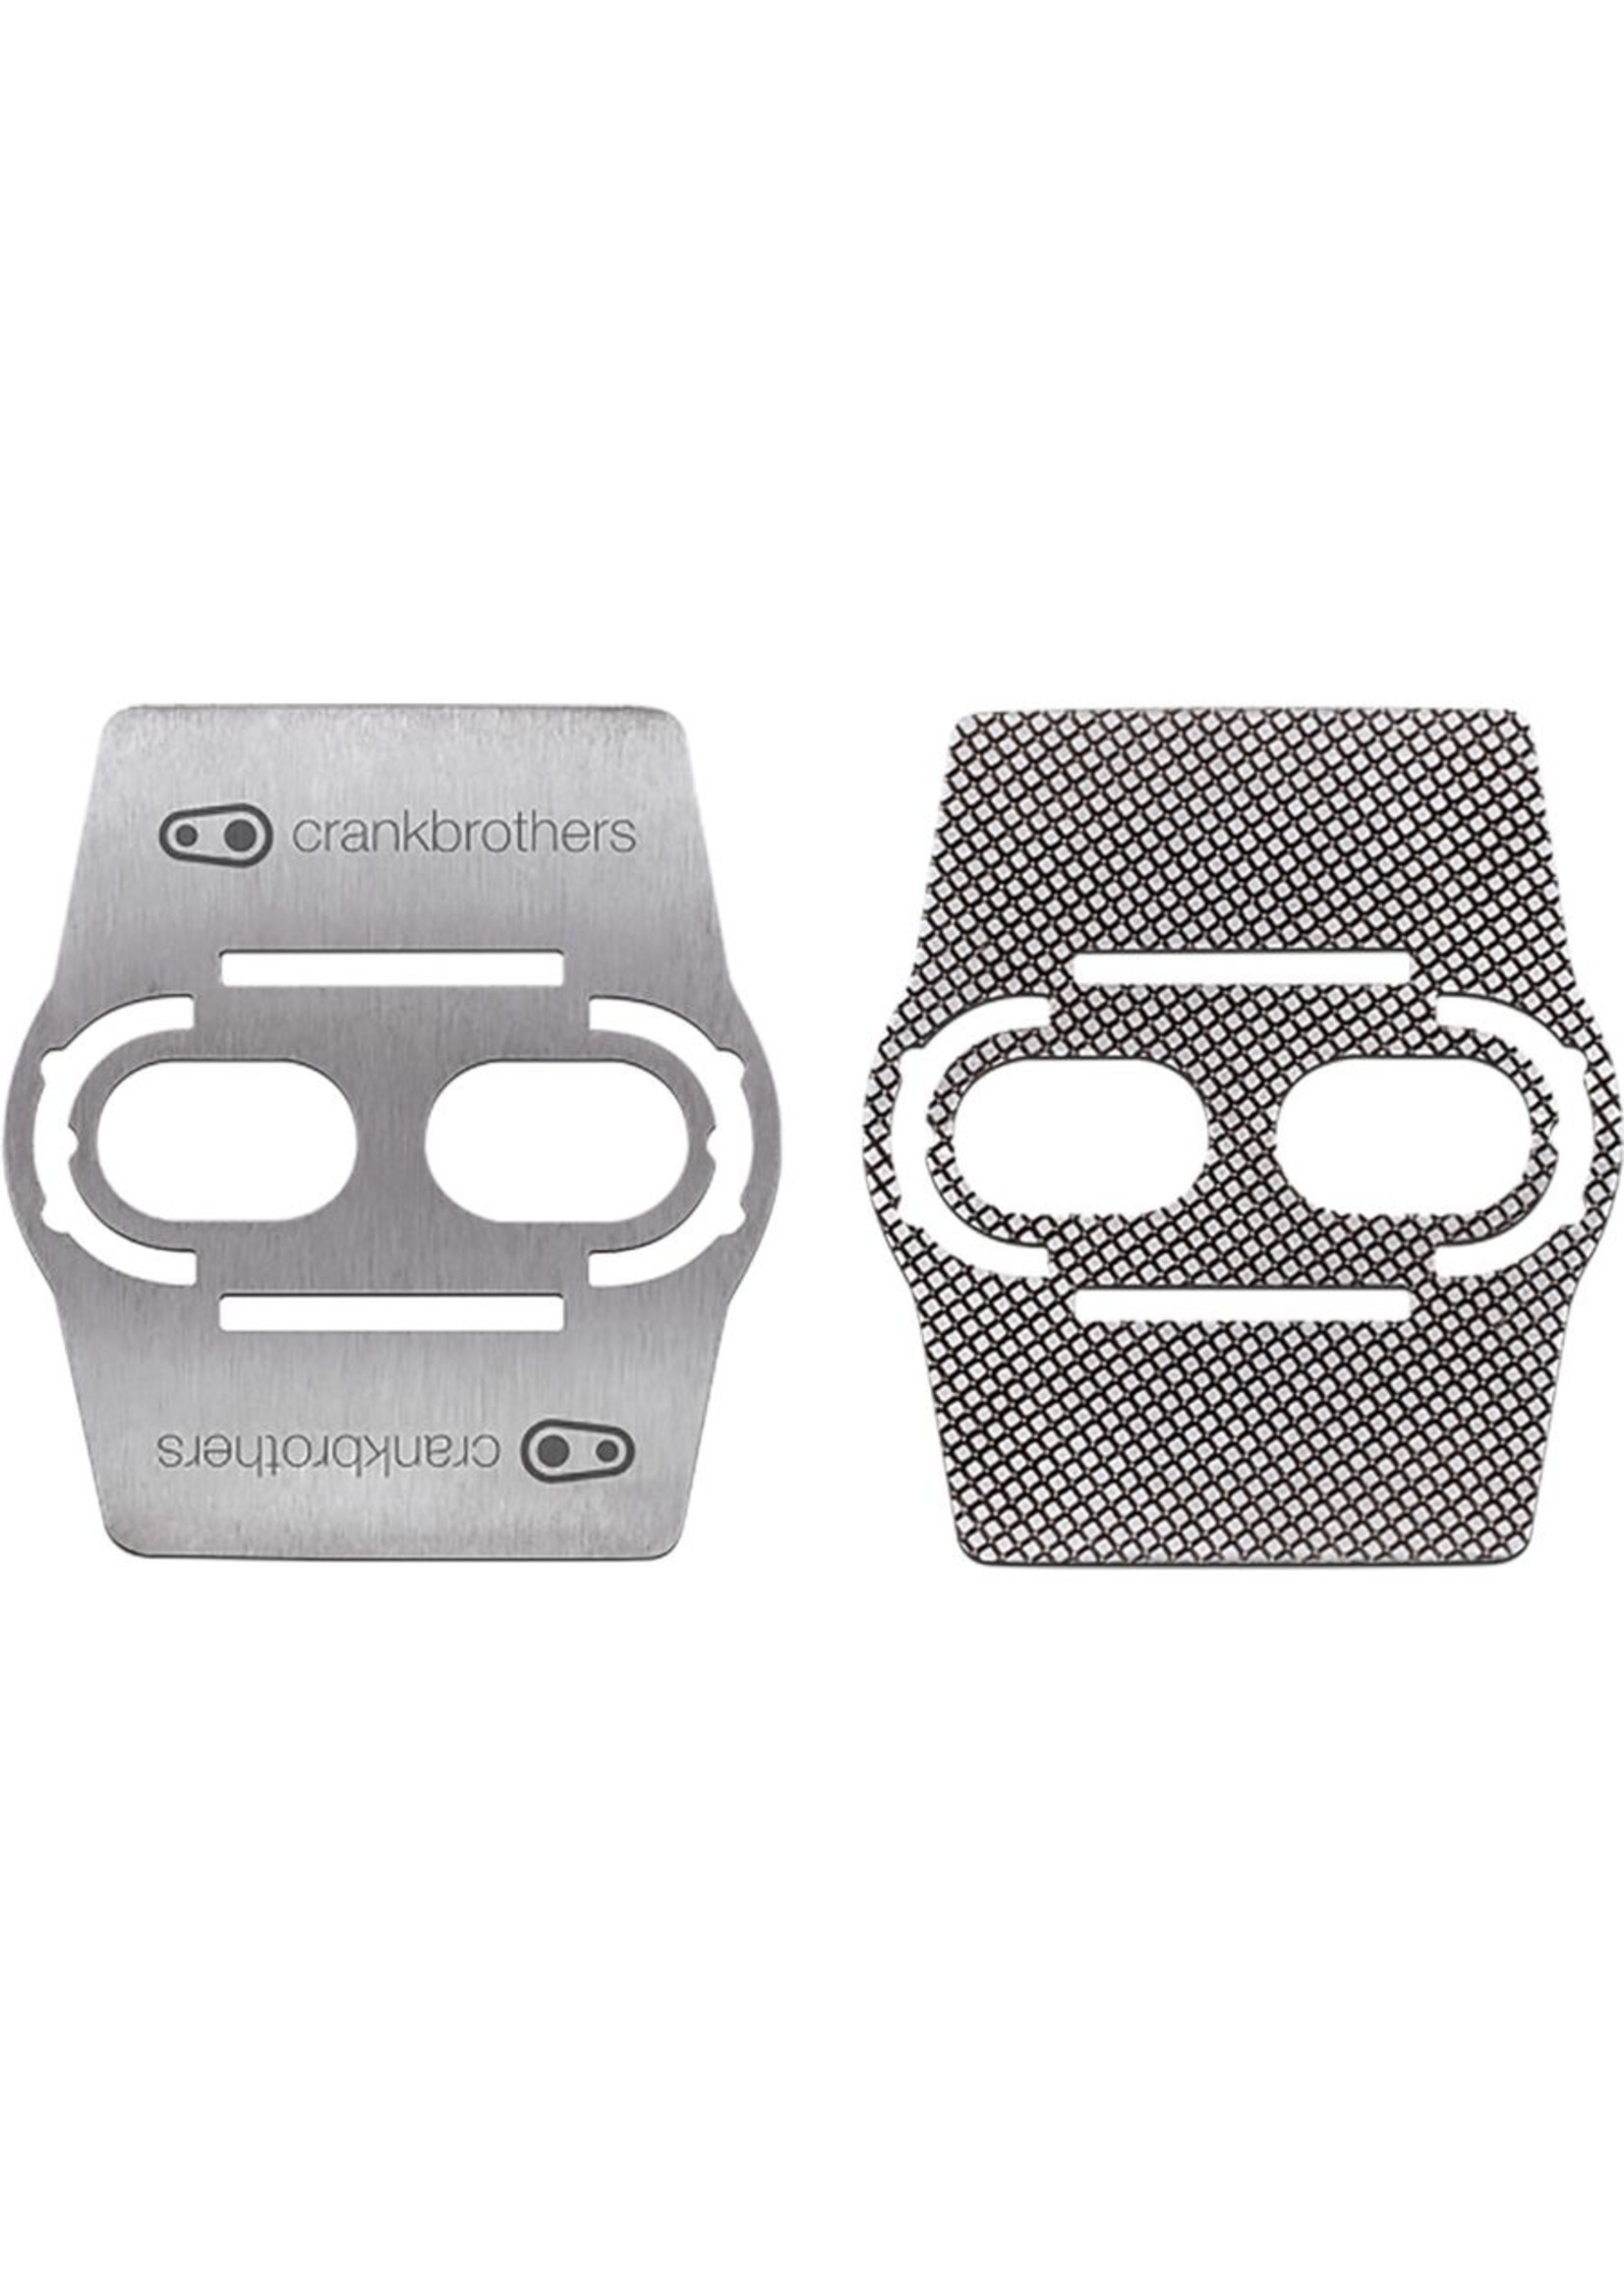 CrankBrothers Crankbrothers Shoe Shields